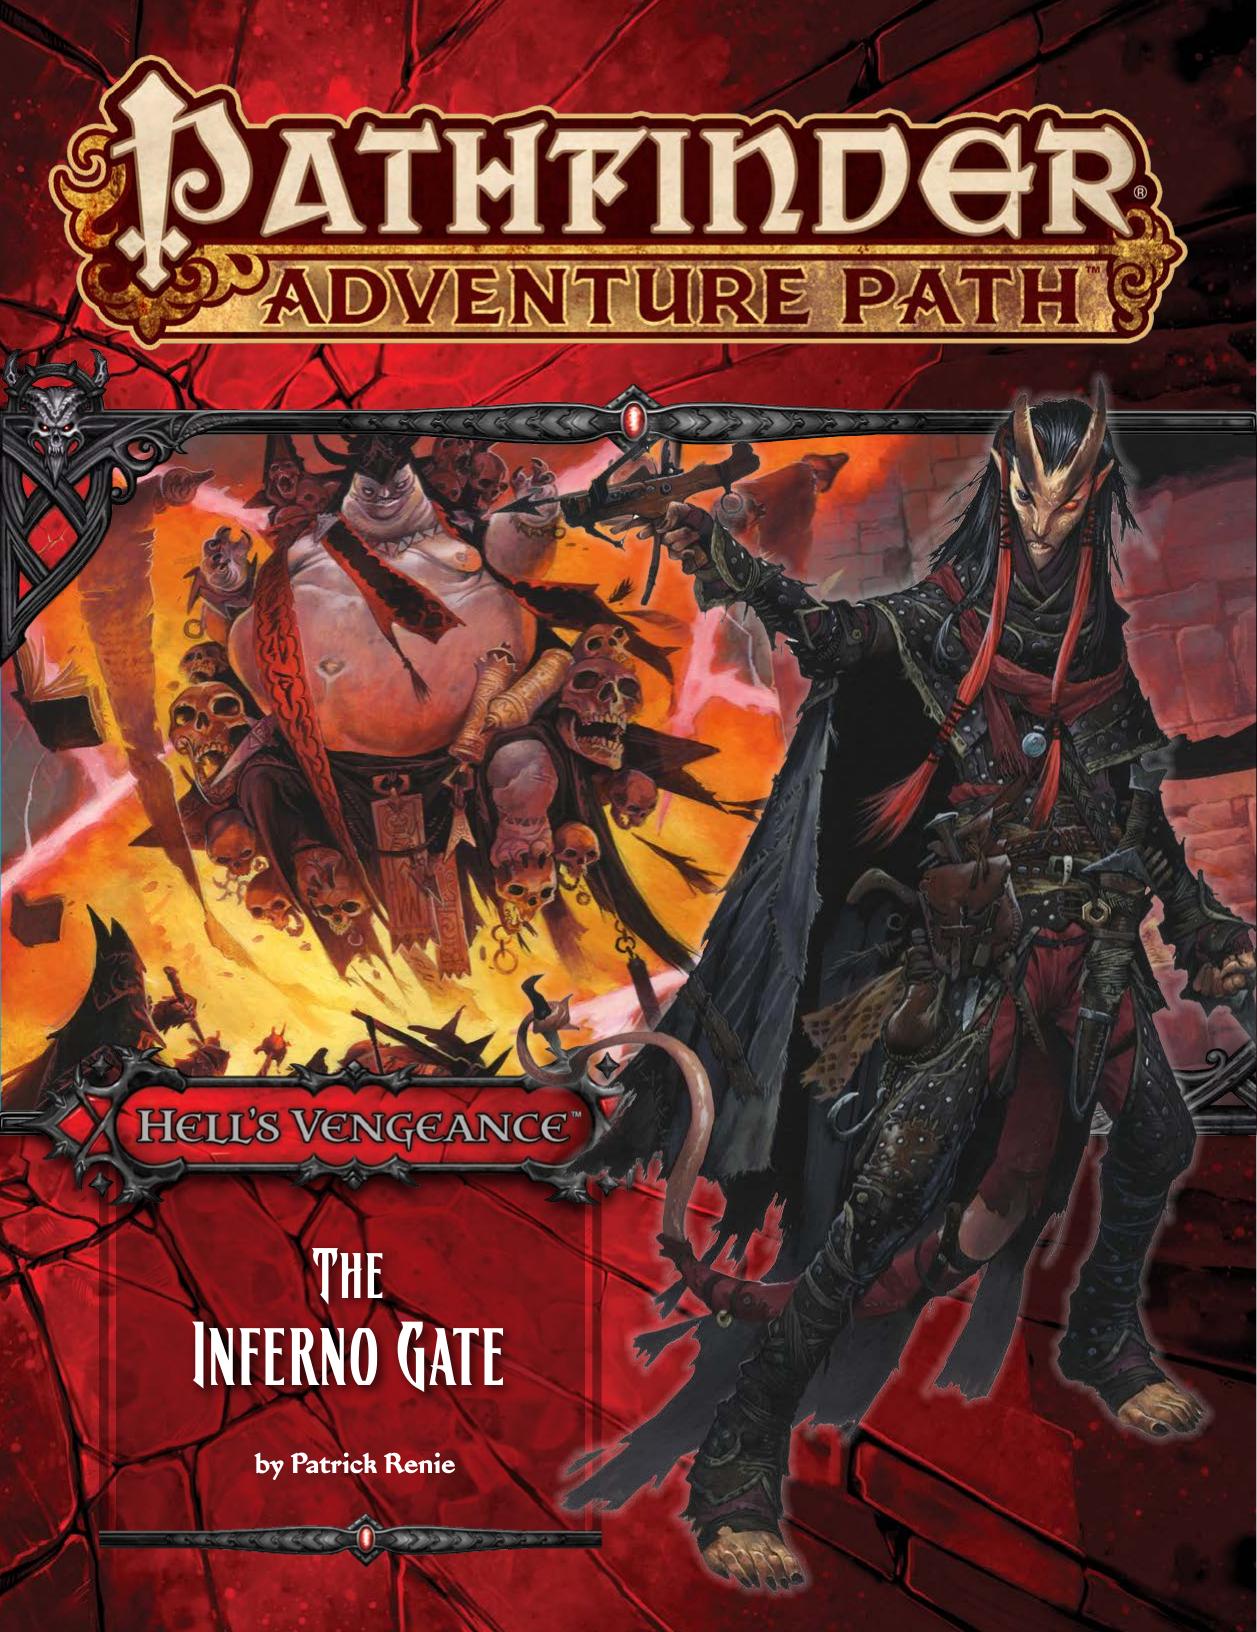 PZO90105 (Hell's Vengeance) The Inferno Gate